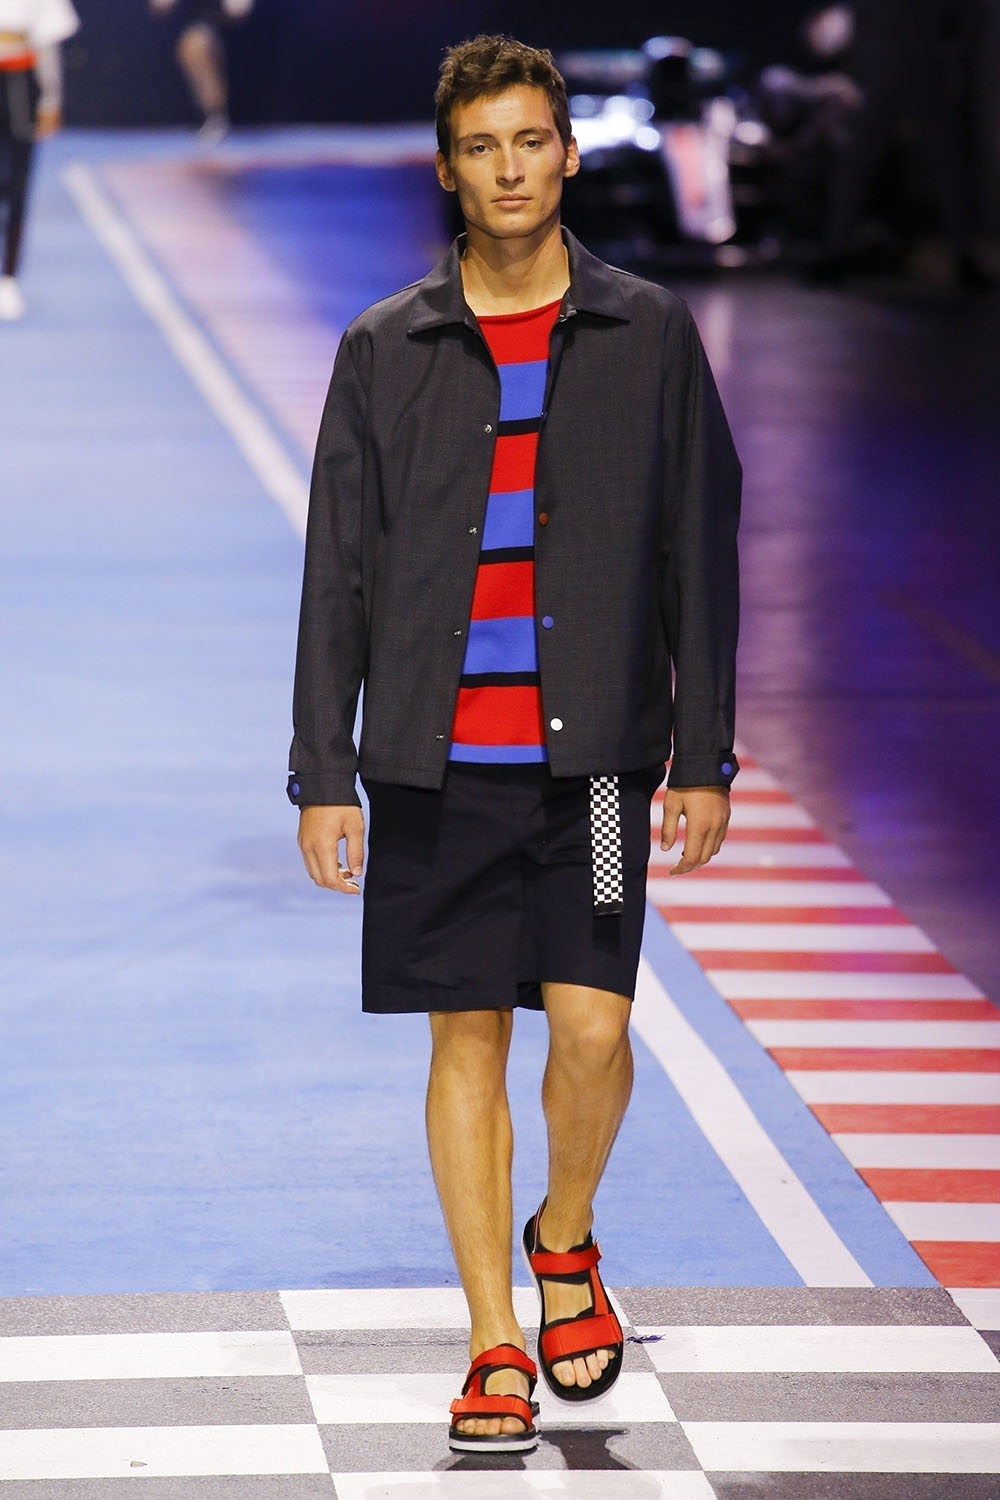 The Tommy Hilfiger fashion show in Milan